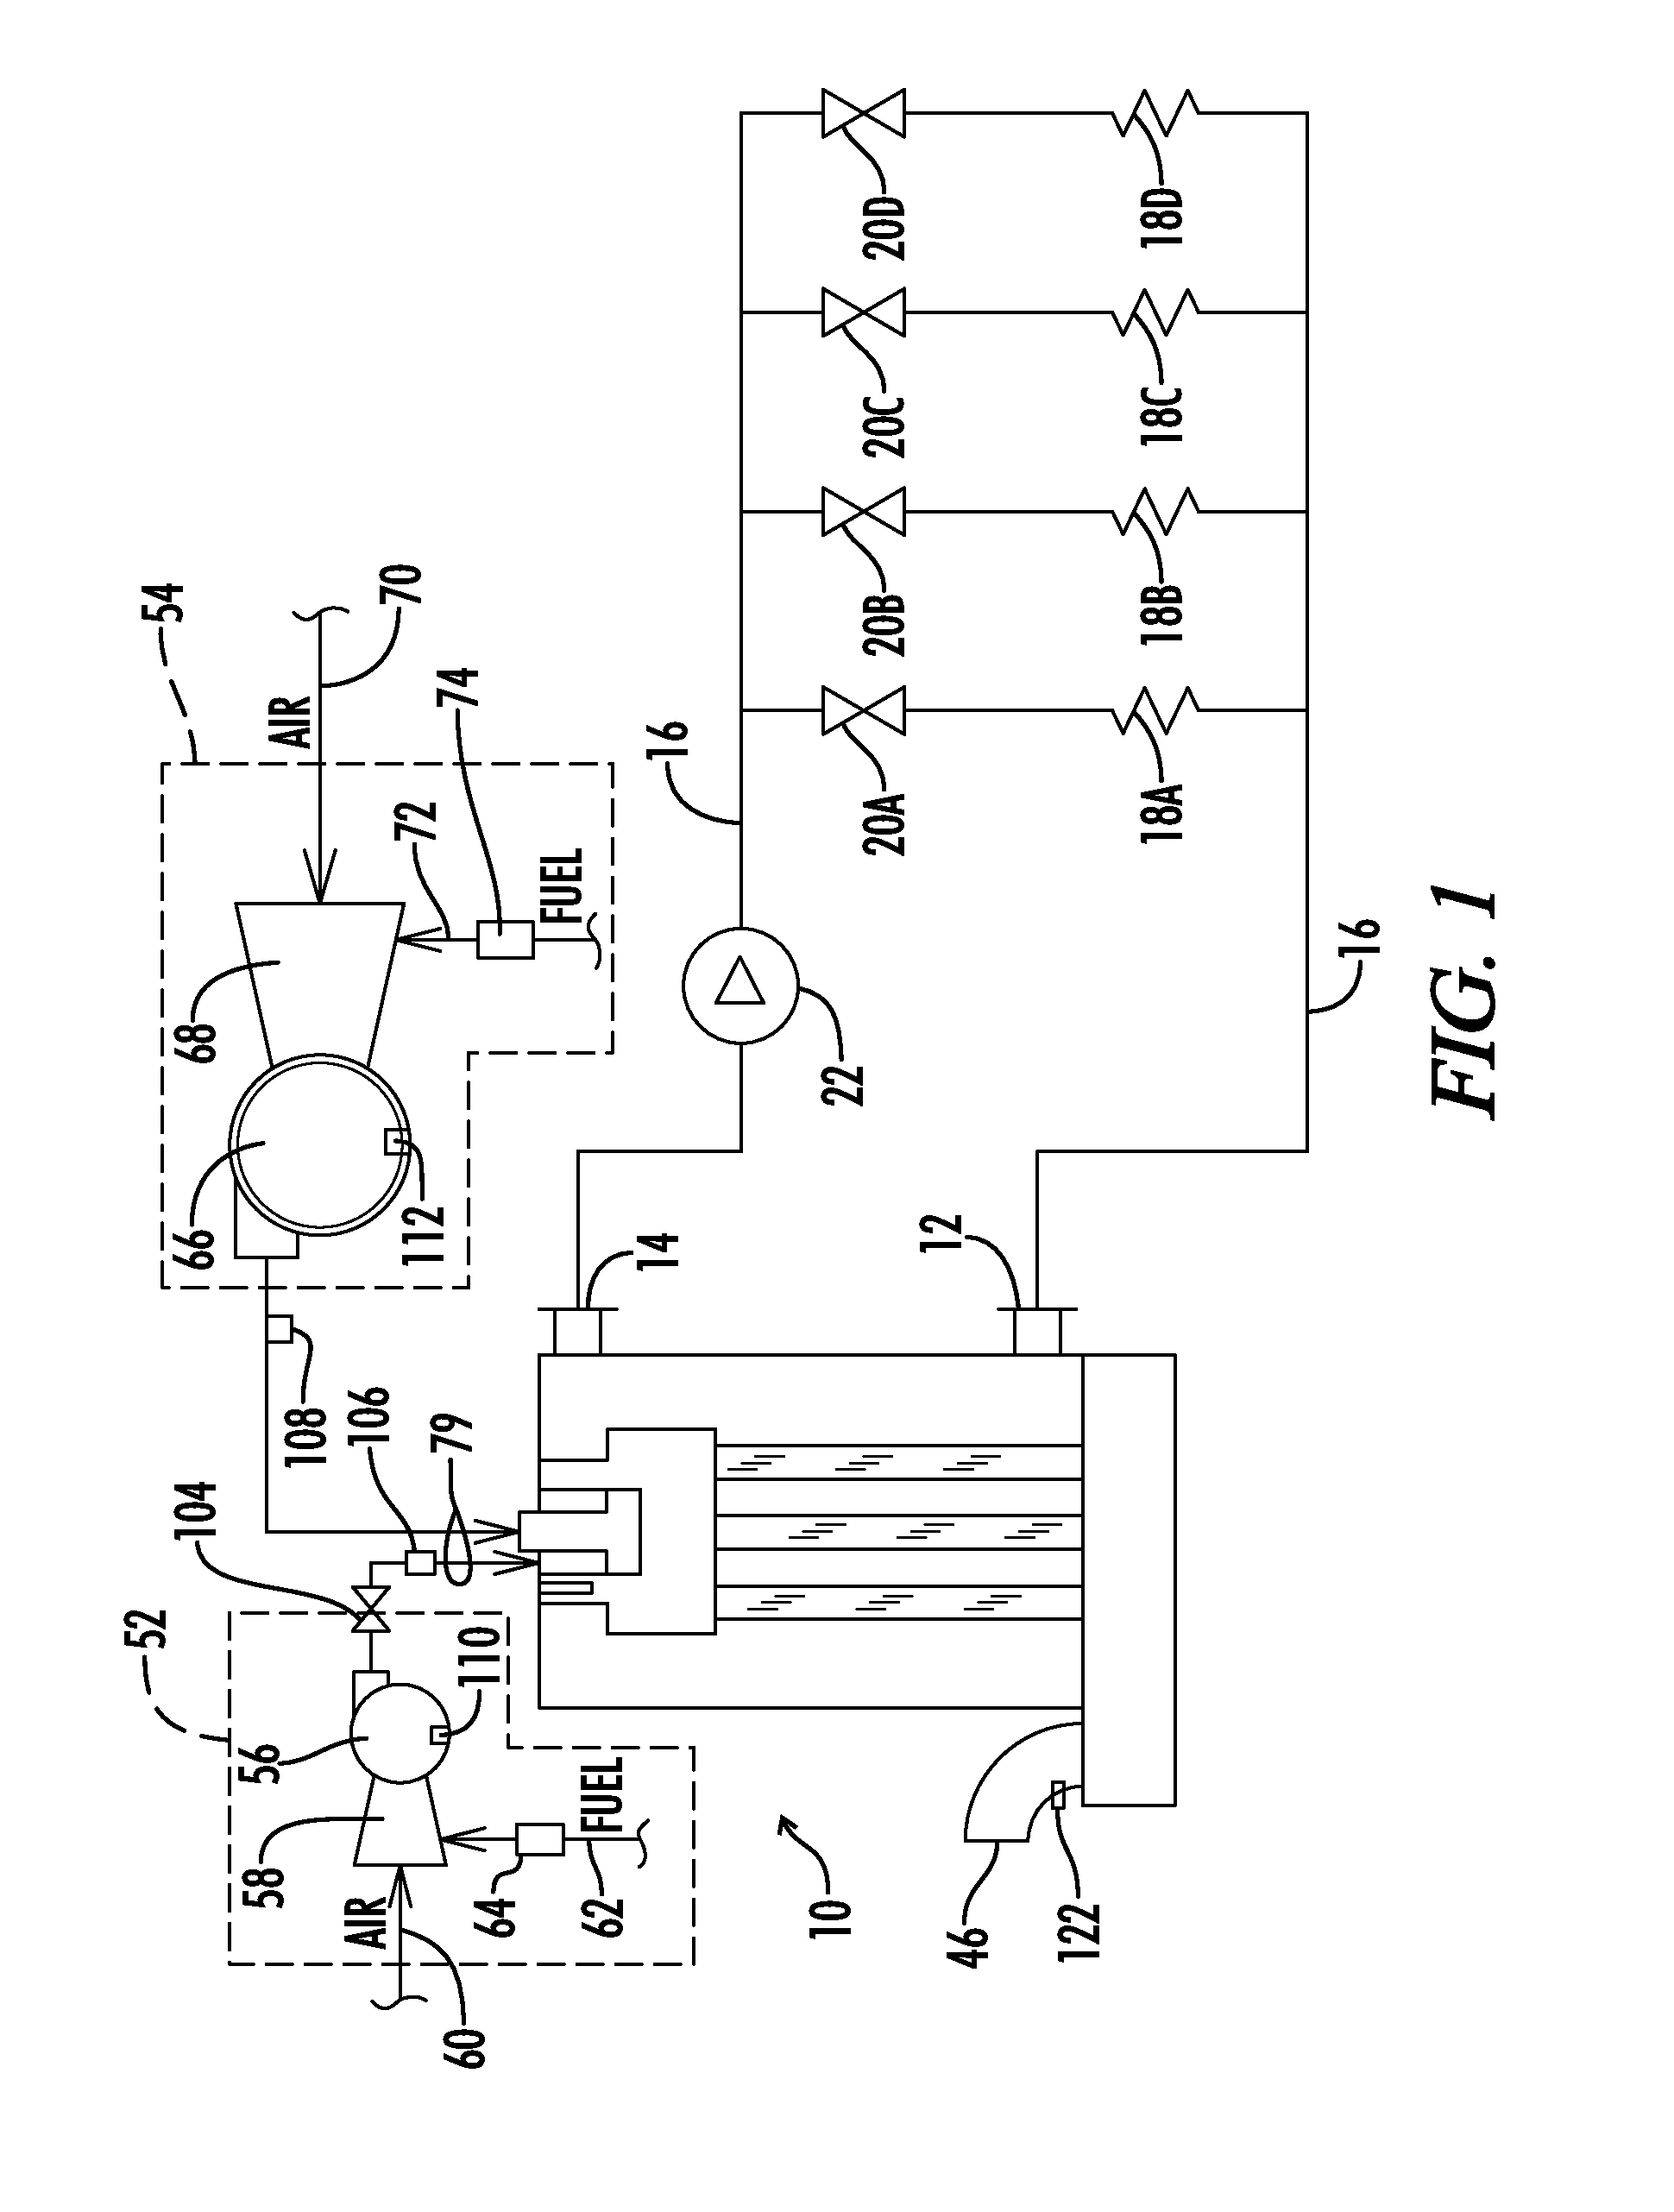 Integrated dual chamber burner with remote communicating flame strip